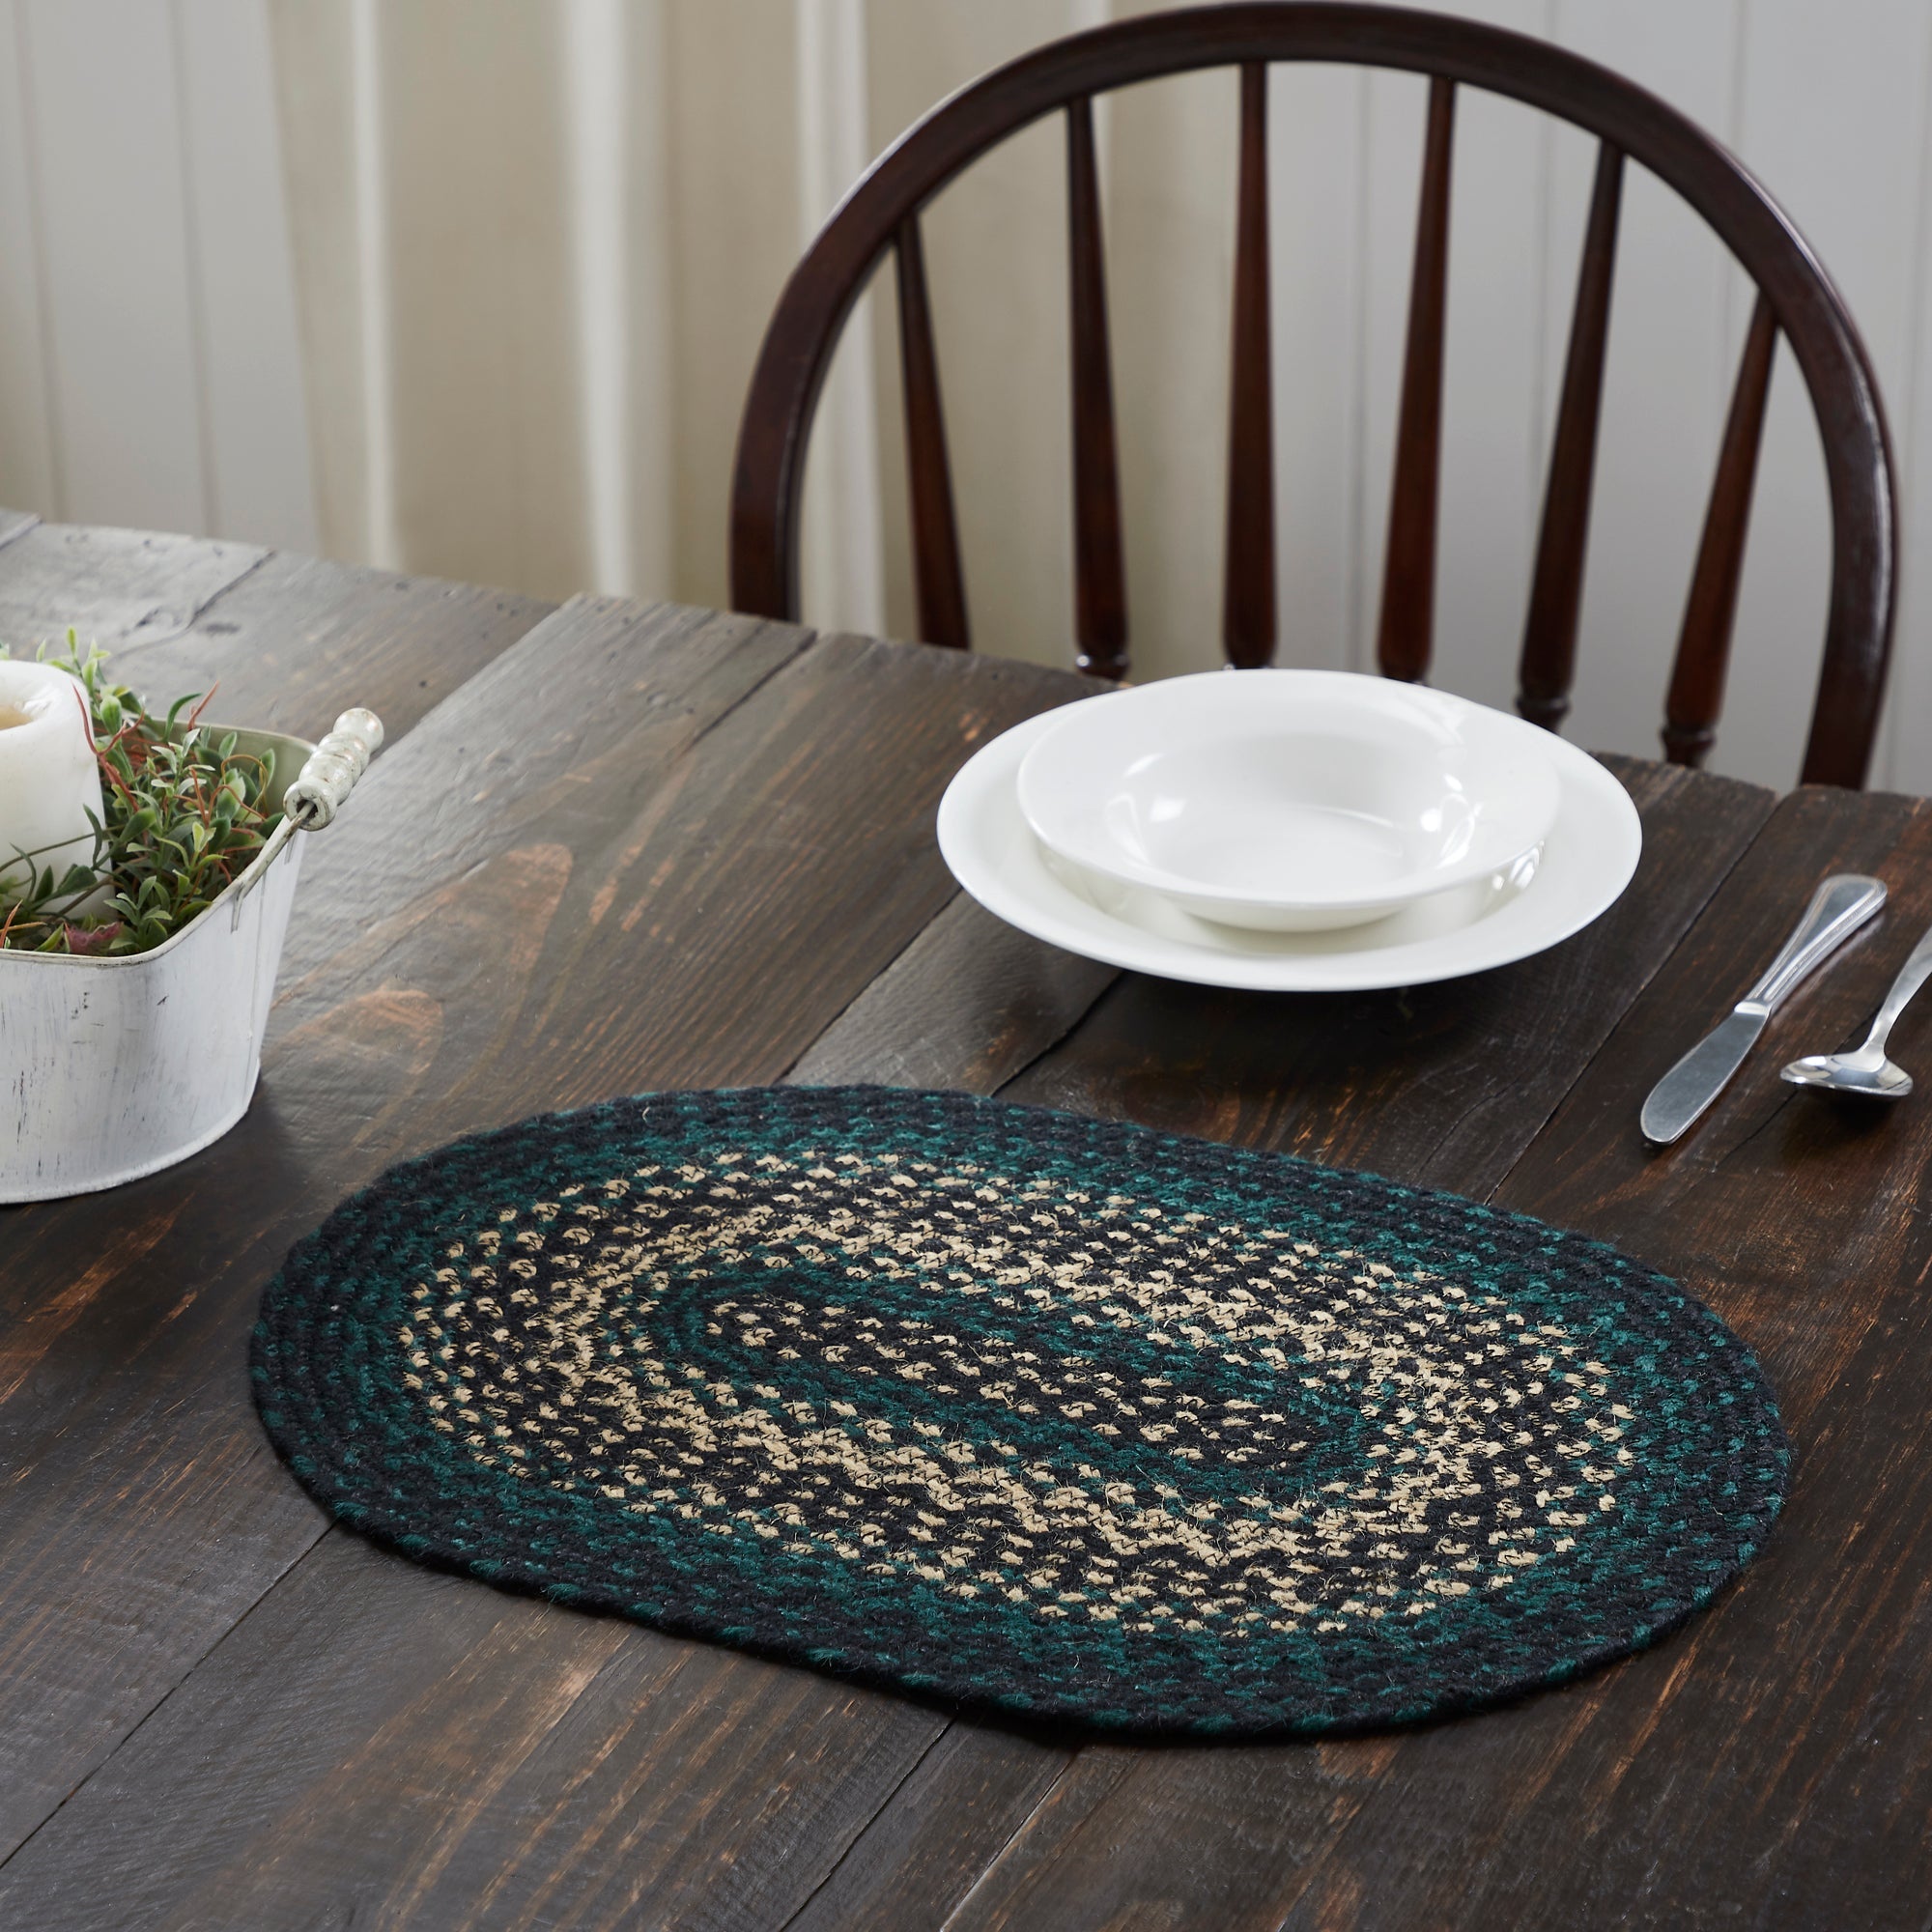 Pine Grove Jute Braided Oval Placemat 12"x18" VHC Brands